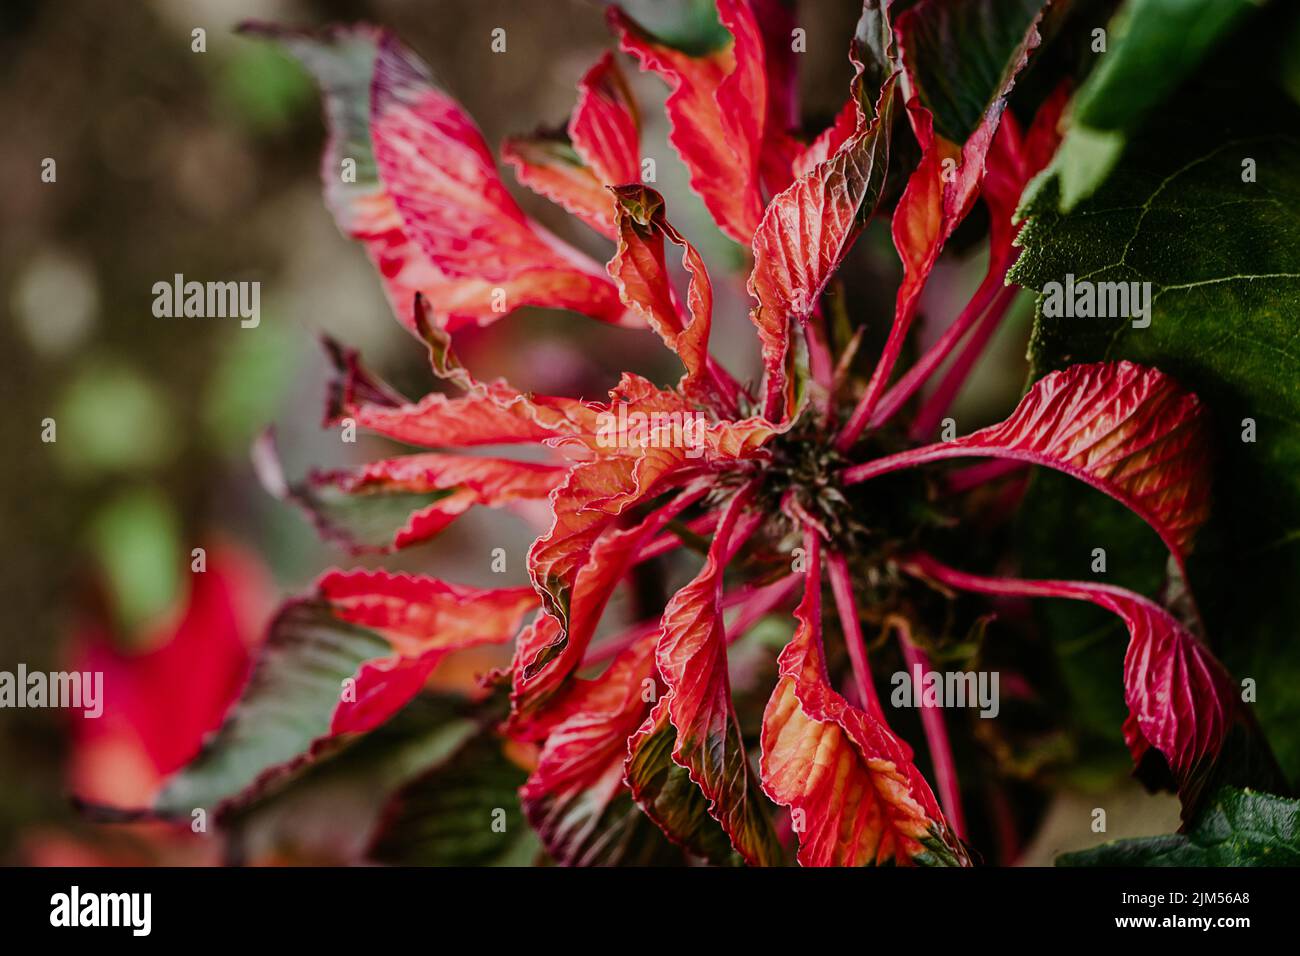 Ornamental plant Amaranthus tricolor. Beautiful red autumn flower in garden. Growing decorative flowers. Stock Photo